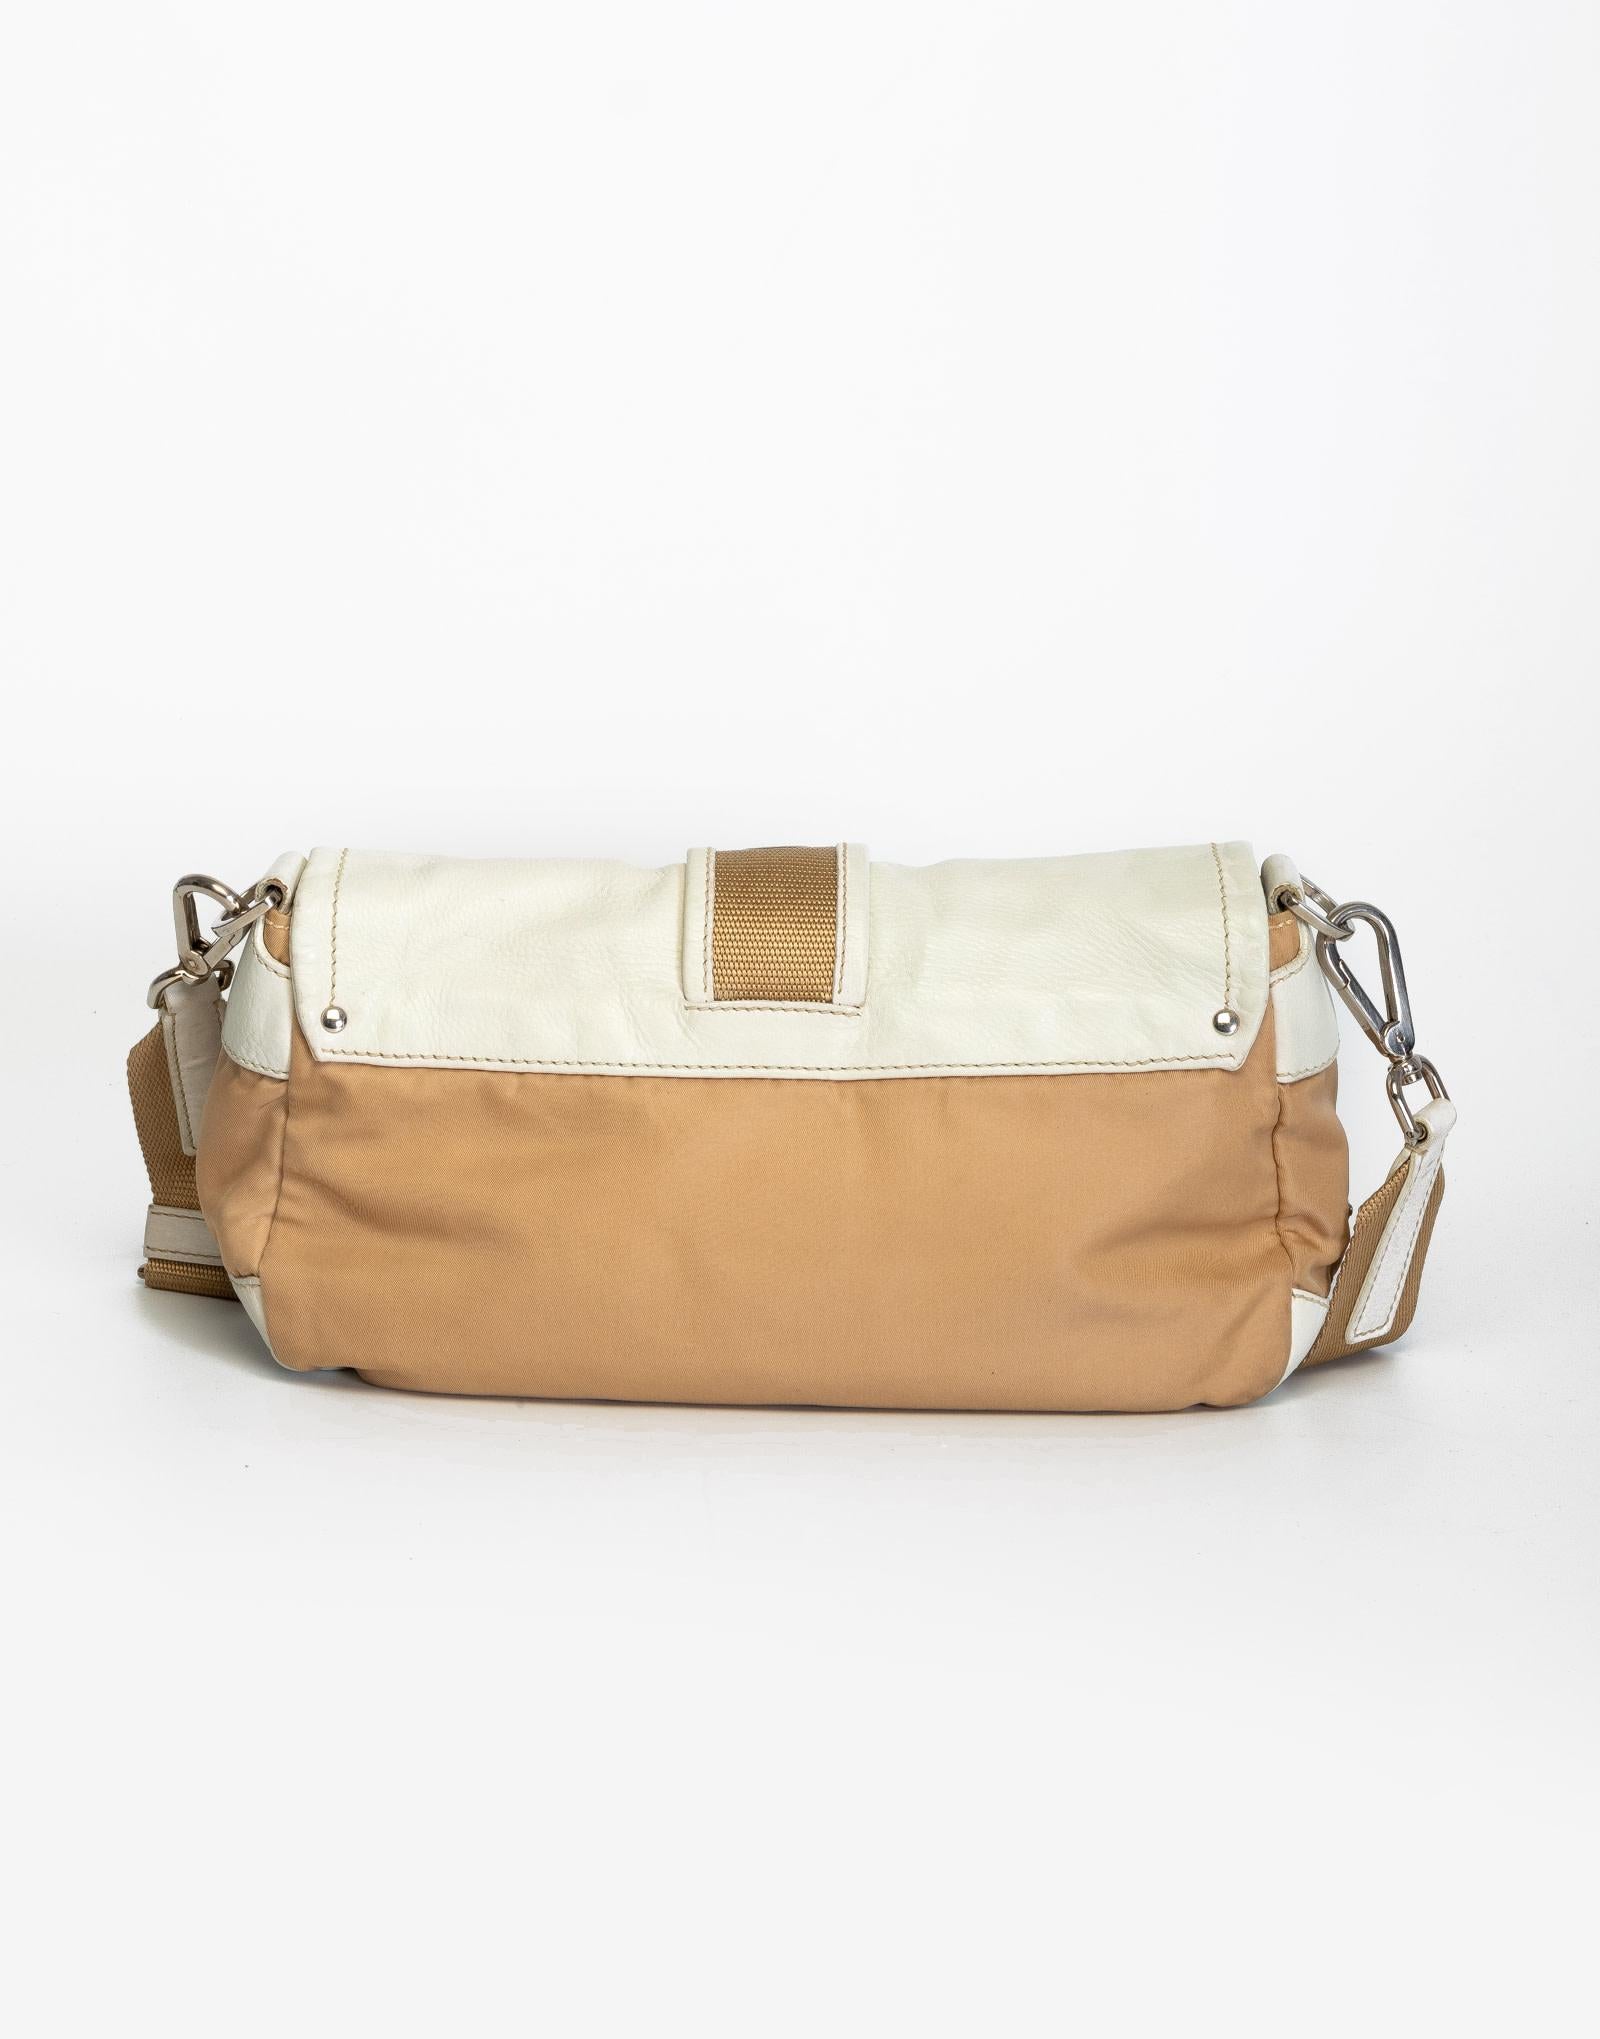 This bag features a cream and beige nylon body, leather trim and a front buckle to secure the top flap with magnetic snap closure.

COLOR: Cream and beige
MATERIAL: Nylon & leather
ITEM CODE: 31
MEASURES: H 5.5” x L 10.5” x D 3.5”
EST. RETAIL: